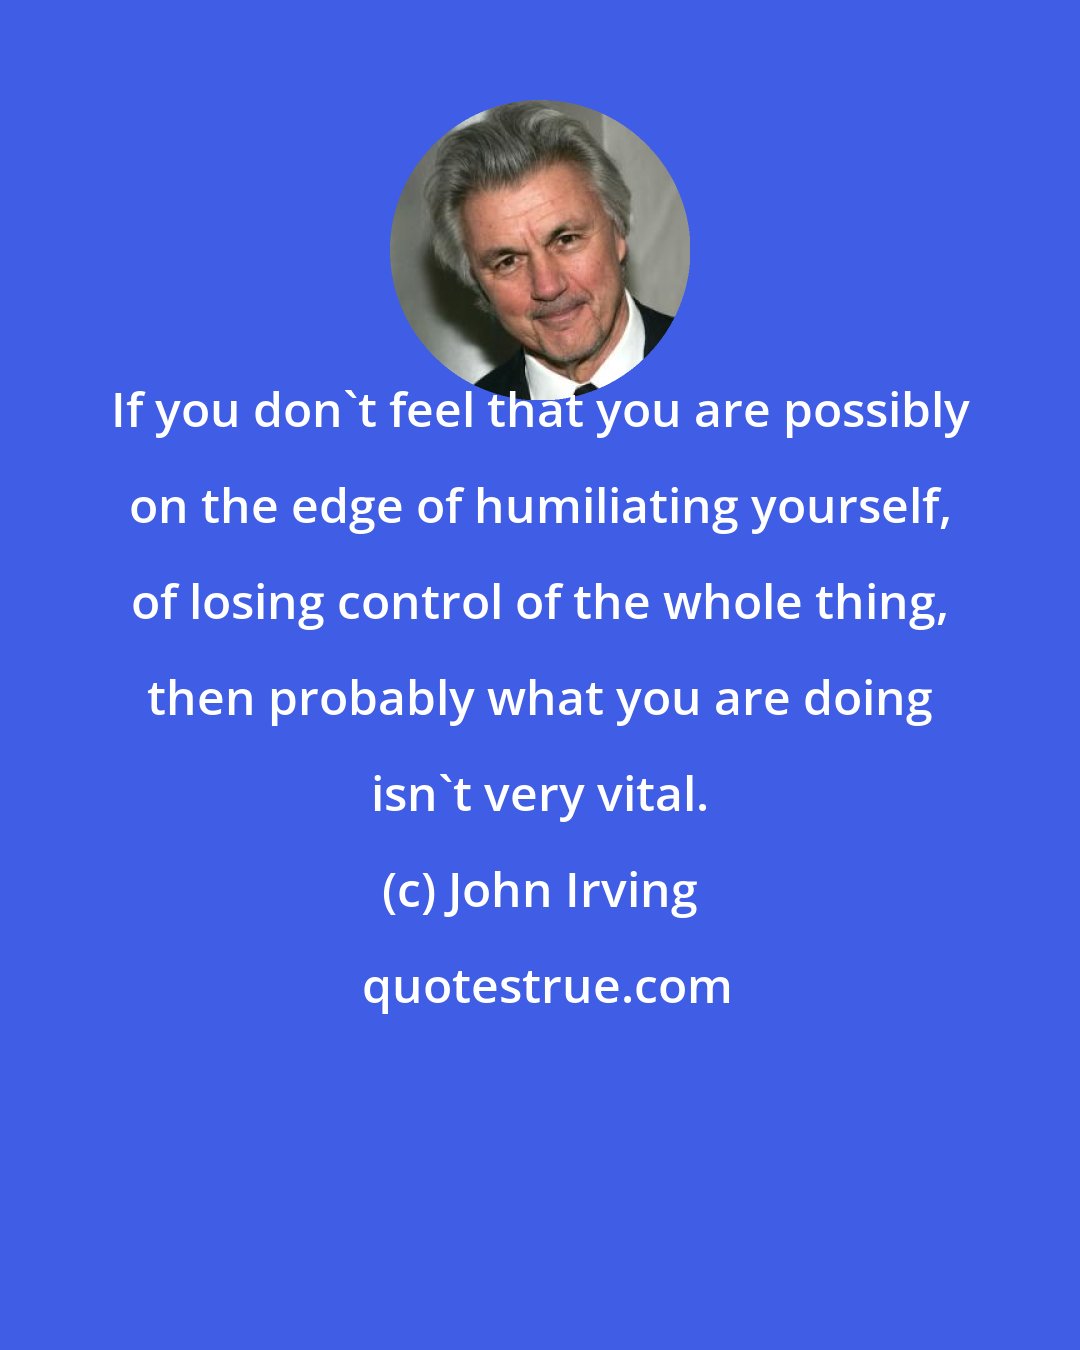 John Irving: If you don't feel that you are possibly on the edge of humiliating yourself, of losing control of the whole thing, then probably what you are doing isn't very vital.